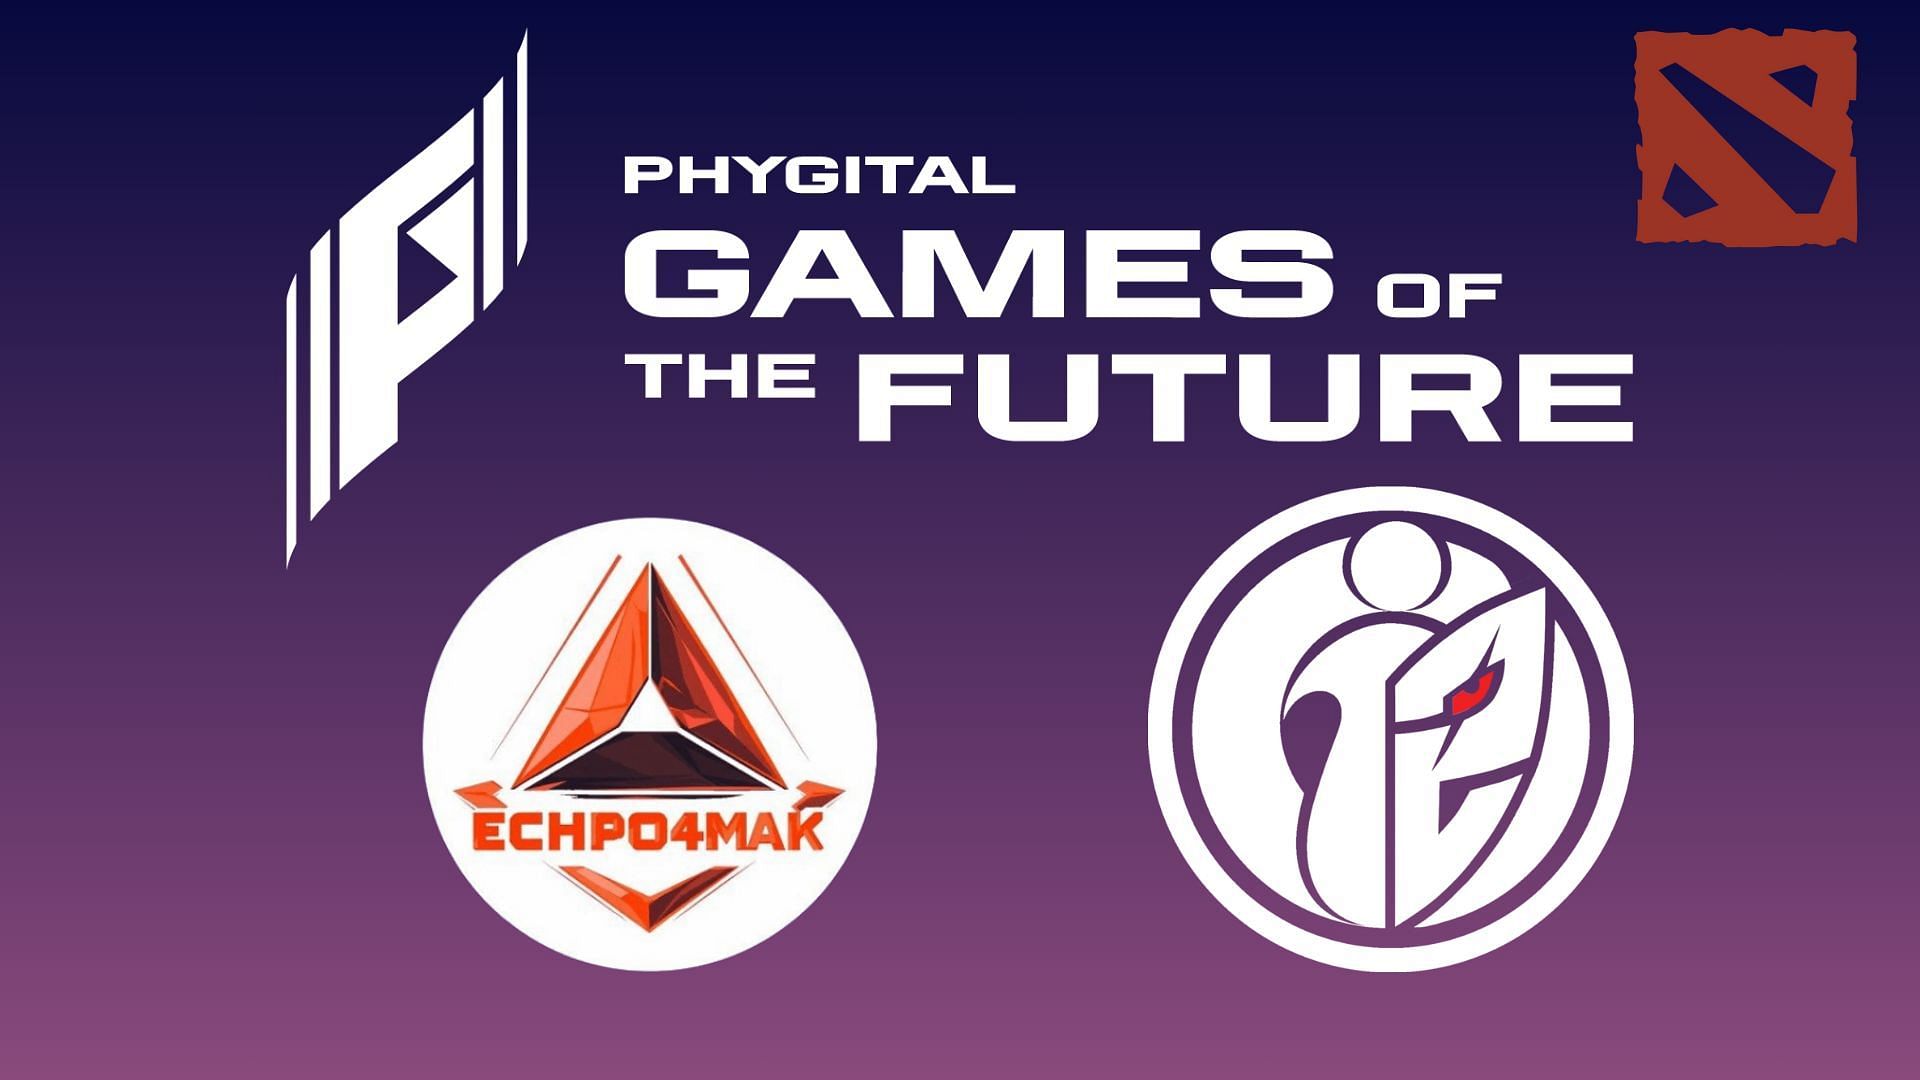 Echpo4mak vs G2.iG Dota 2 Games of the Future 2024 Group Stage